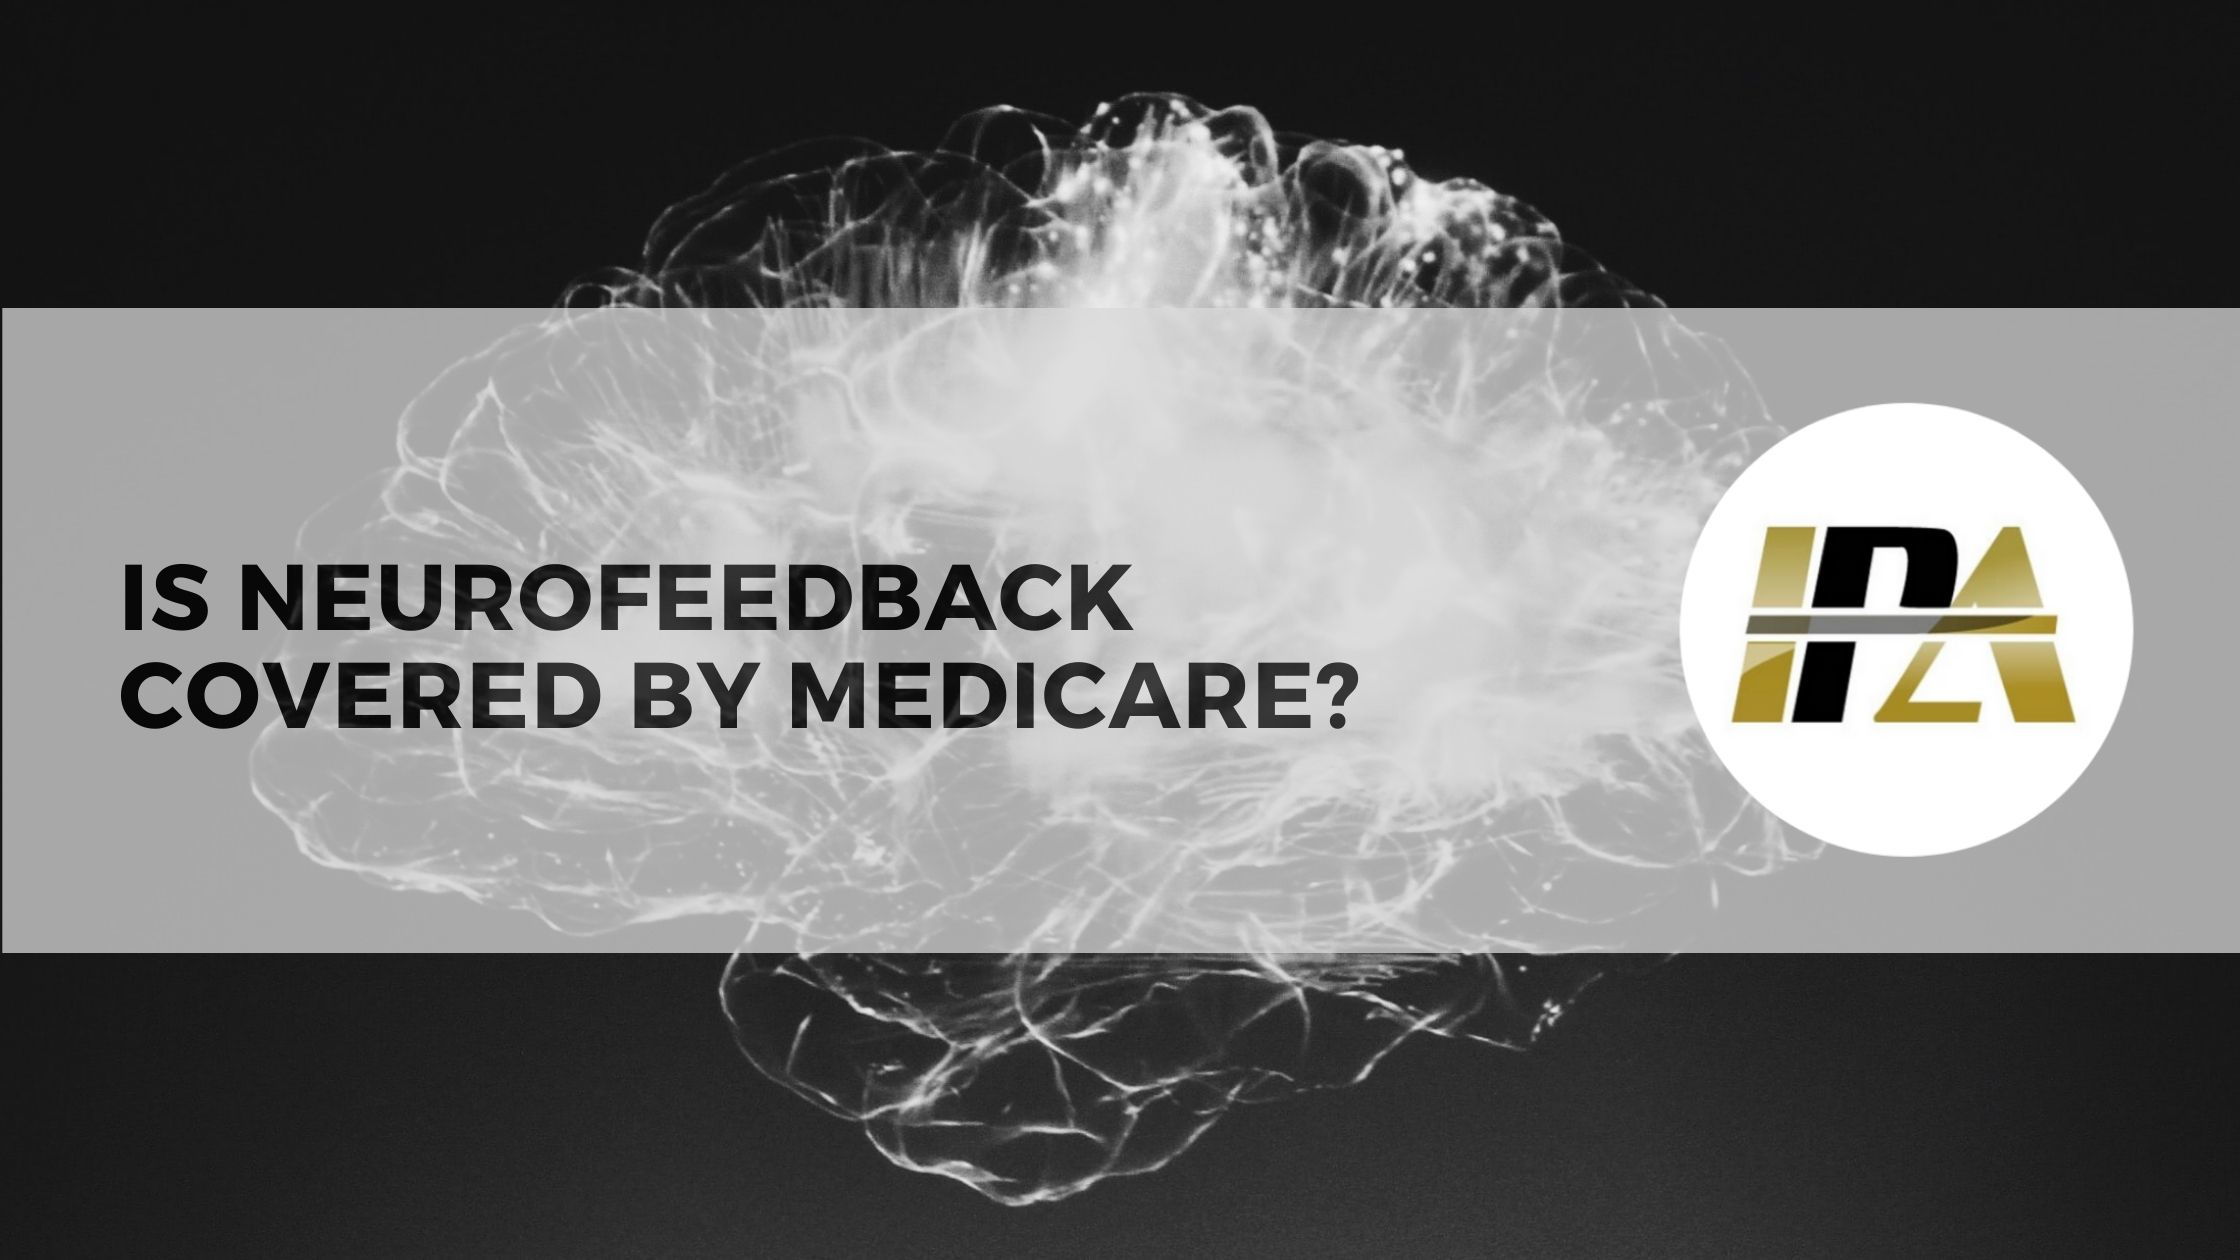 Neurofeedback covered by Medicare